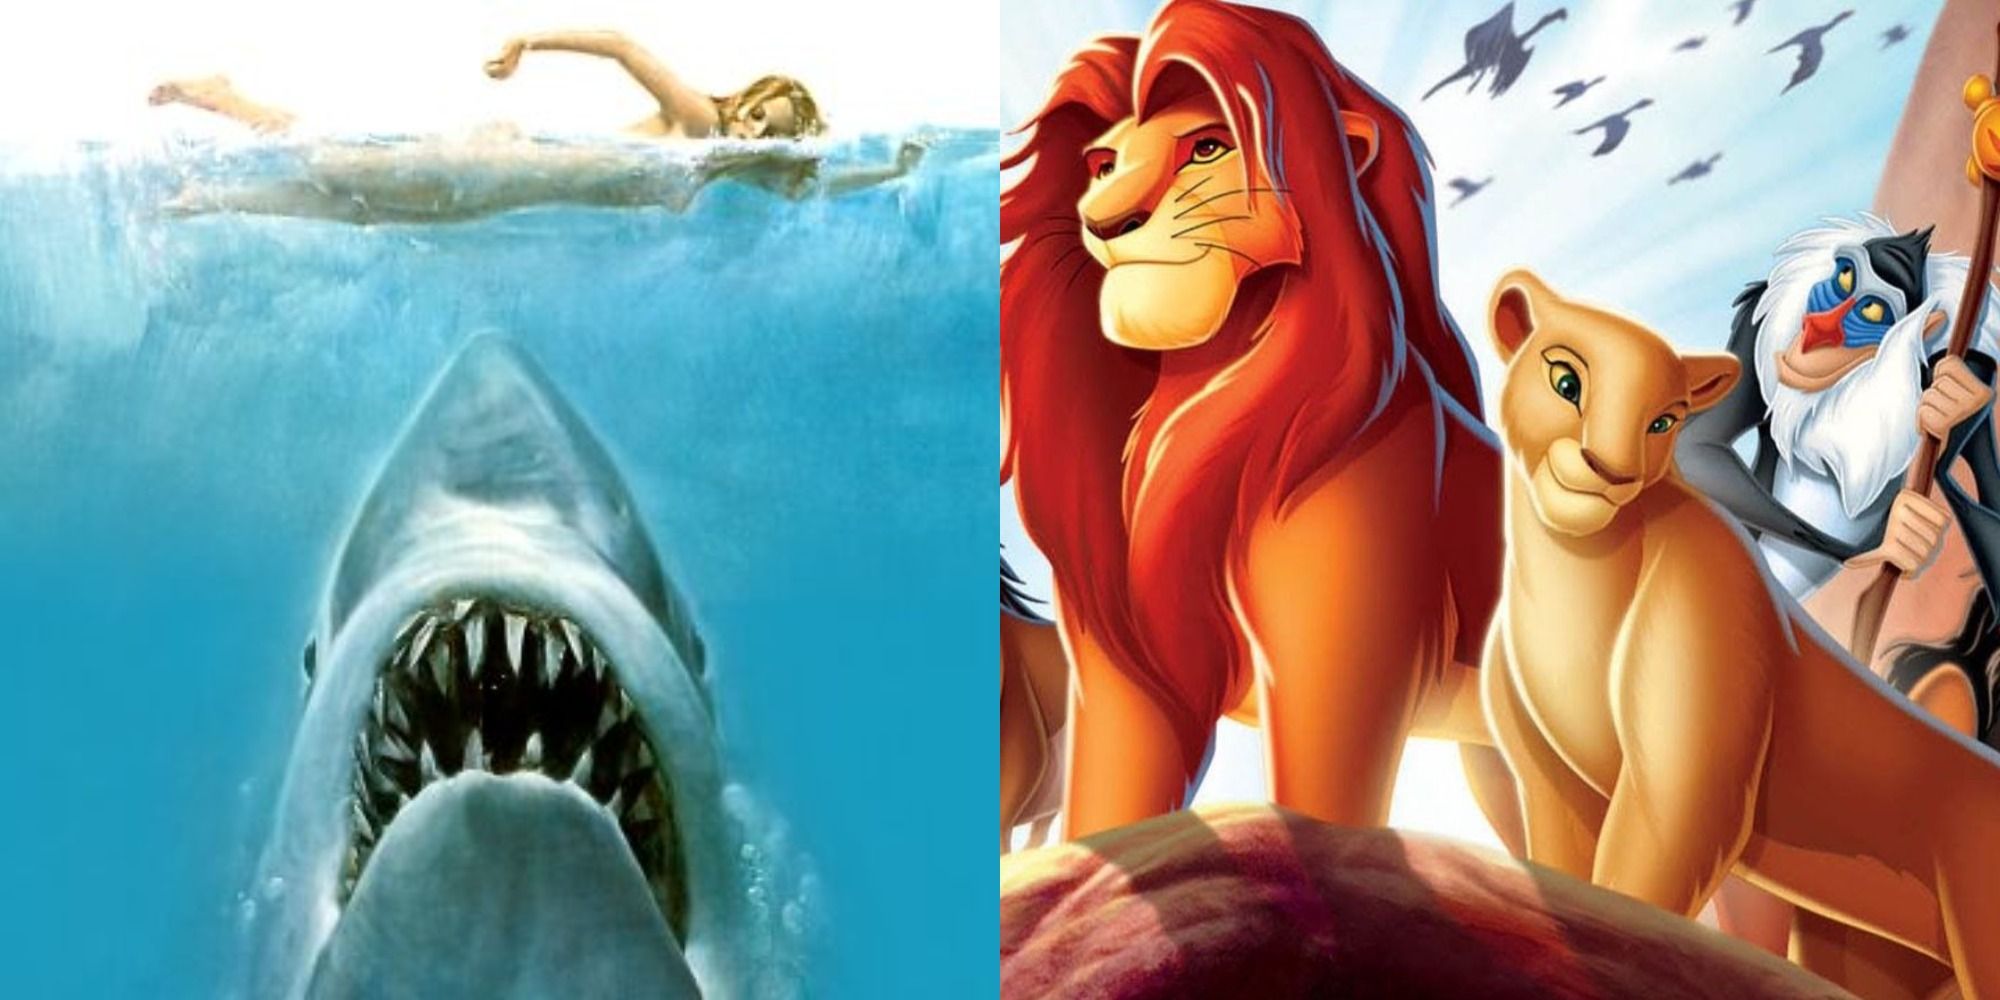 Split image showing posters for Jaws and the animated The Lion King